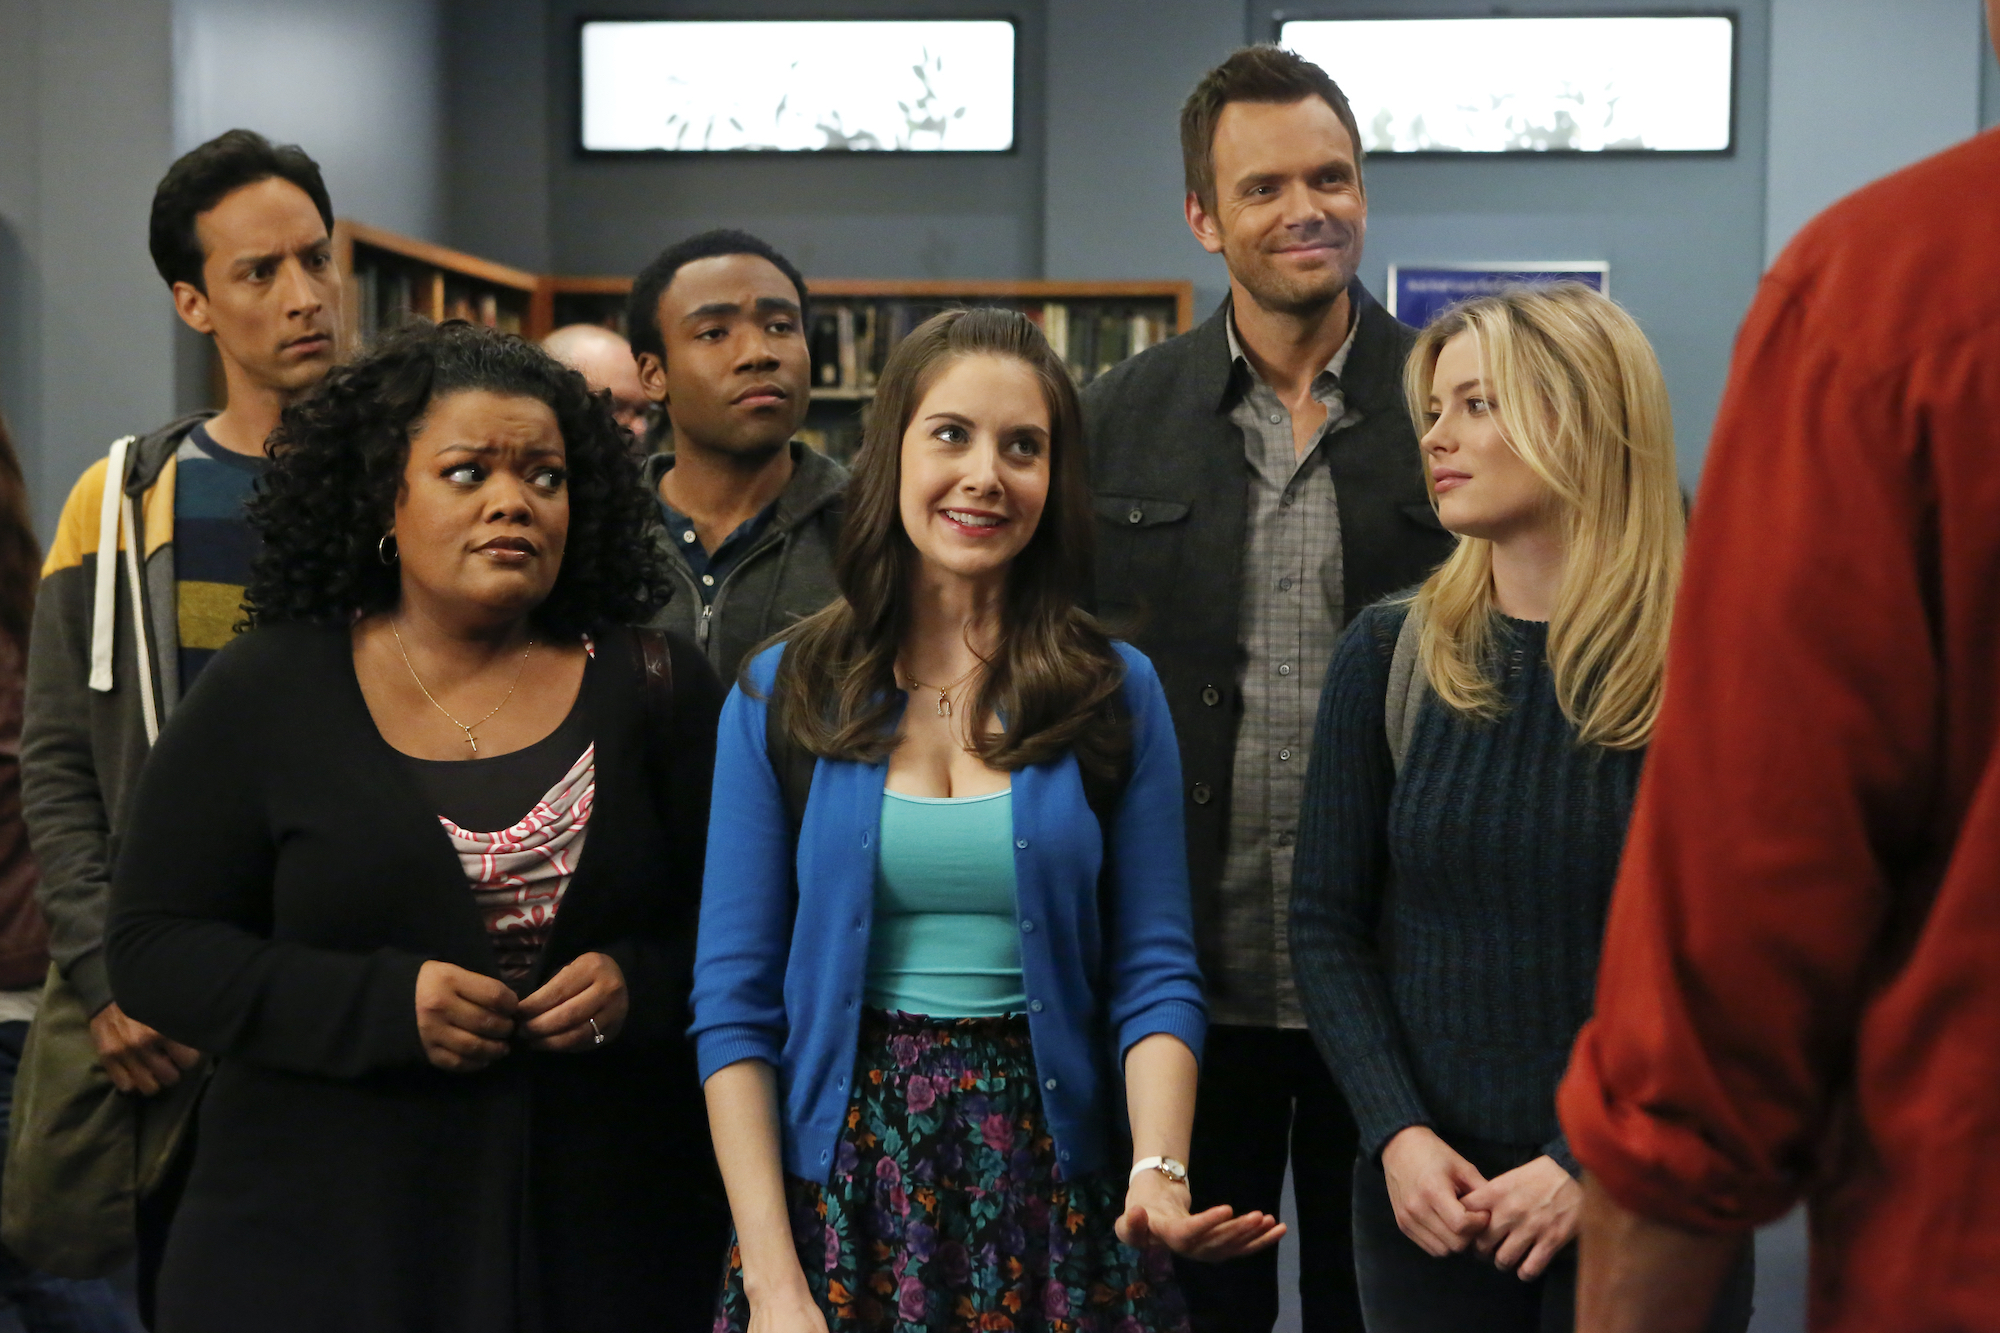 ‘Community’: The Theme Song Has a Super Depressing Meaning